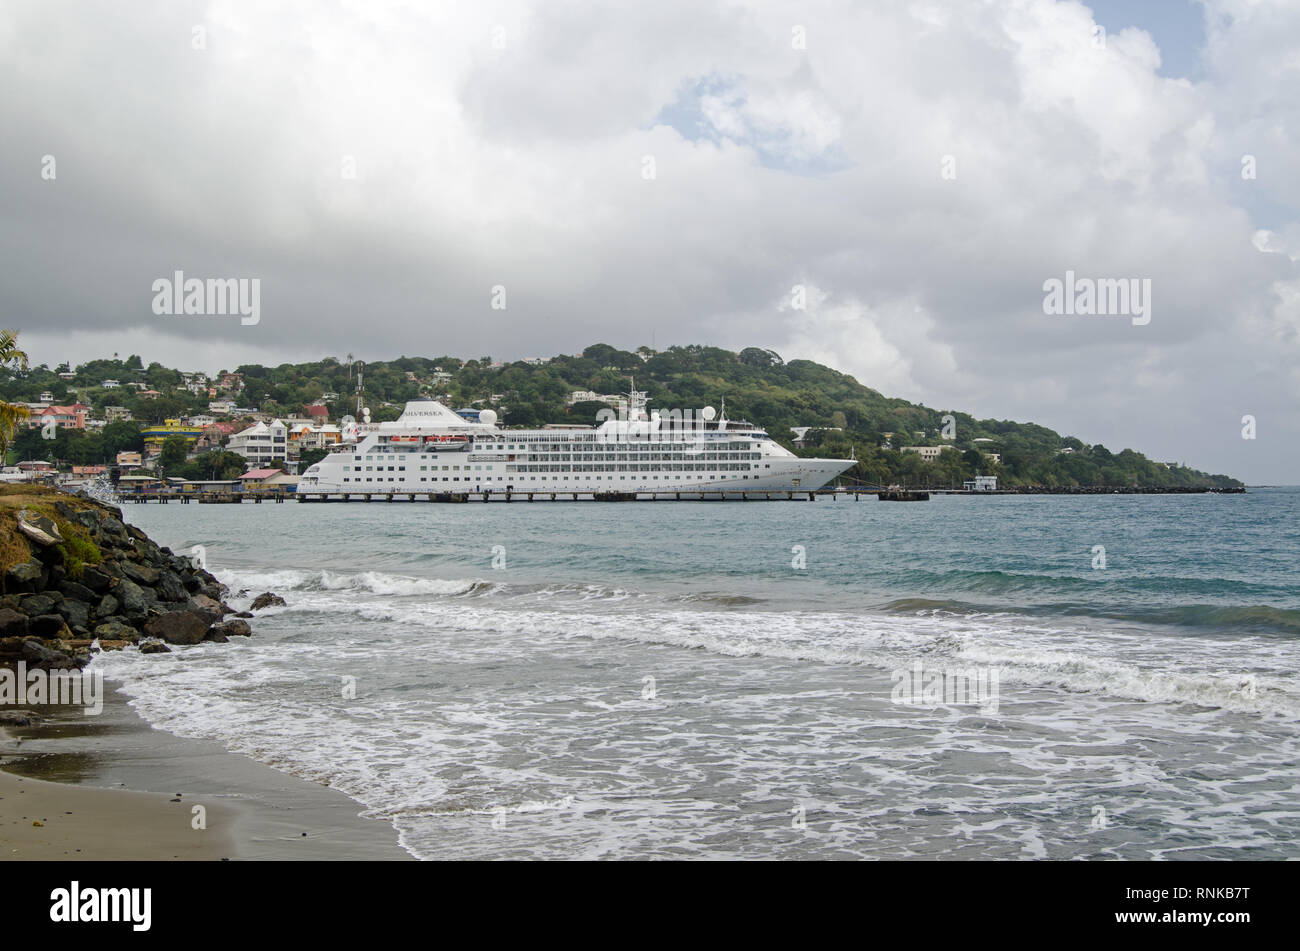 SCARBOROUGH, TRINIDAD AND TOBAGO - JANUARY 11, 2019:  View across the main bay at Scarborough with the cruise ship Silver Wind docked in the deep wate Stock Photo